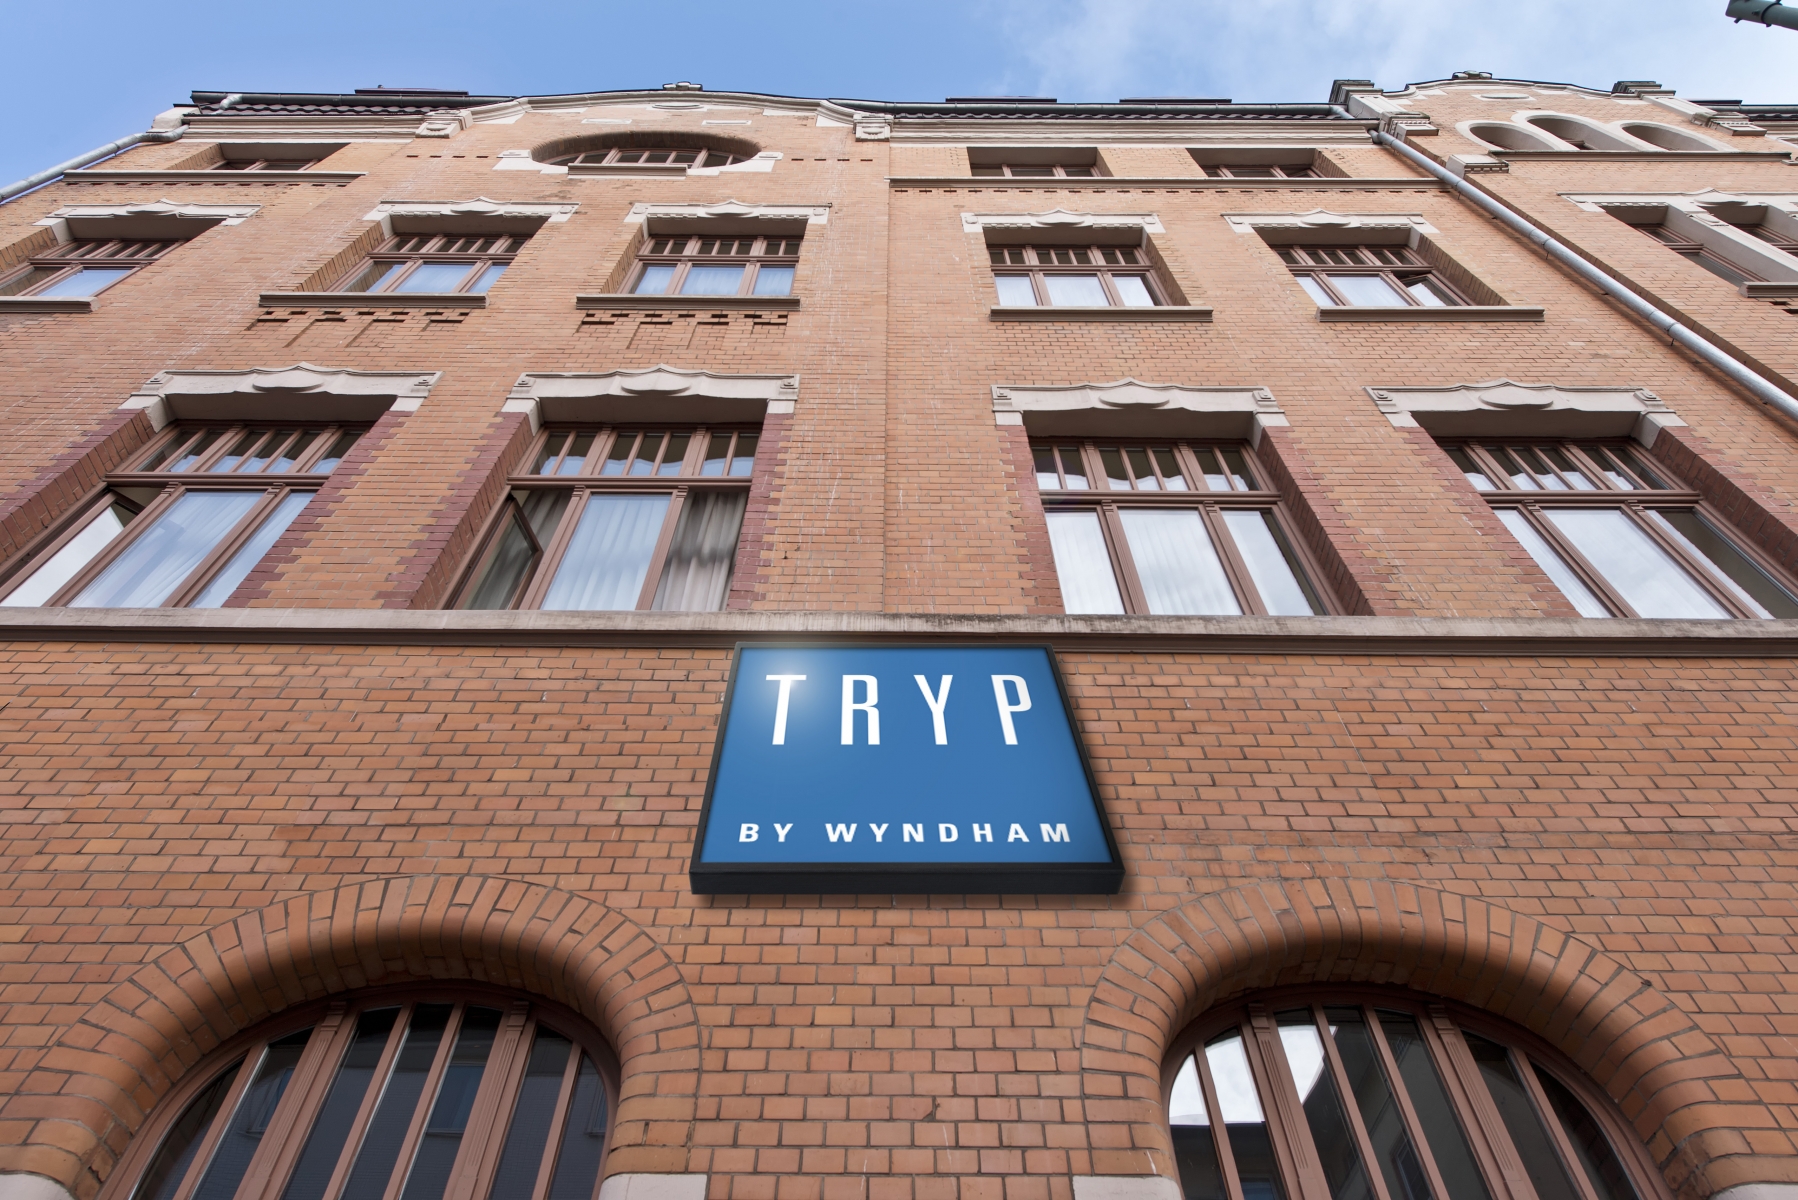 TRYP by Wyndham Kassel City Centre <br/>58.65 ew <br/> <a href='http://vakantieoplossing.nl/outpage/?id=424bb9a2c95a9a9606ab5a98b64a01ac' target='_blank'>View Details</a>